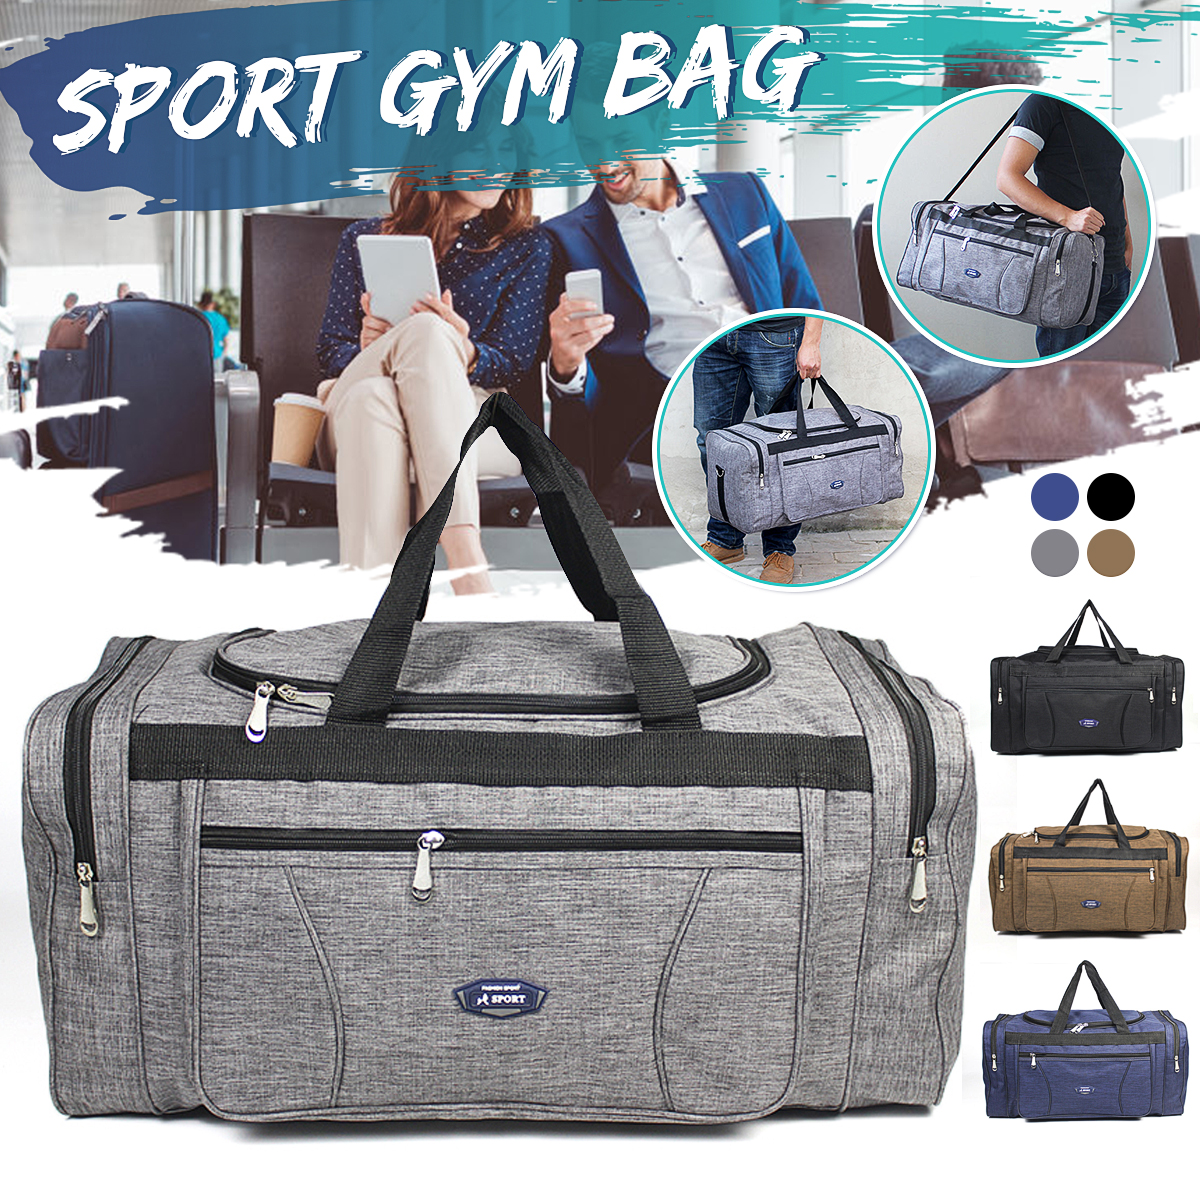 Multi-Size-Oxford-Fitness-Training-Gym-Bag-Durable-Outdoor-Travel-Handbag-Sport-Tote-Bag-For-Male-Fe-1718734-1